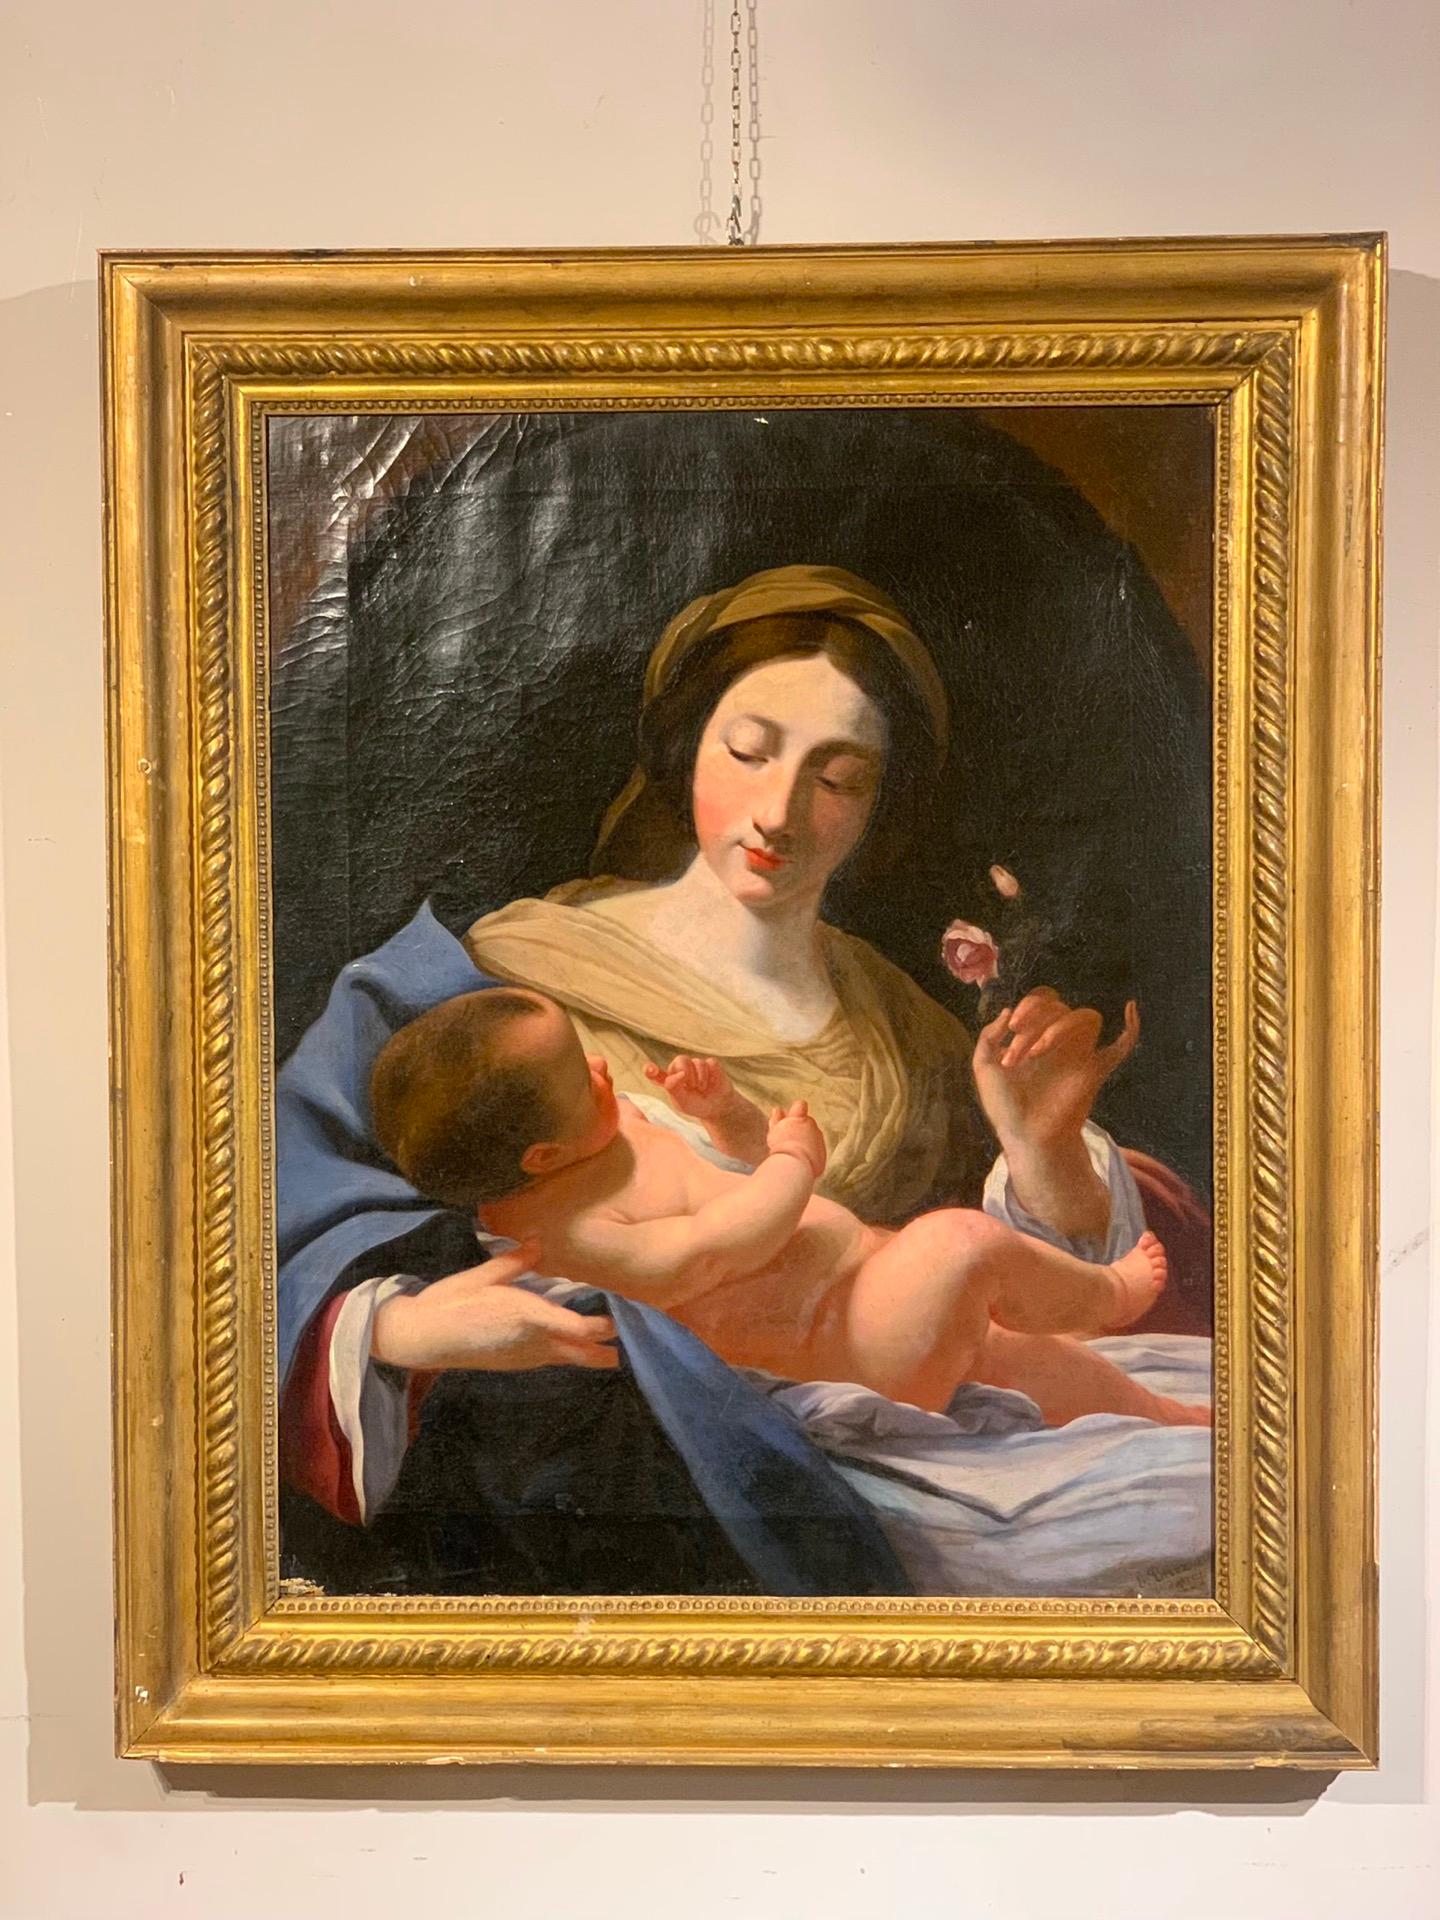 French 19th CENTURY PAINTING MADONNA AND CHILD  For Sale